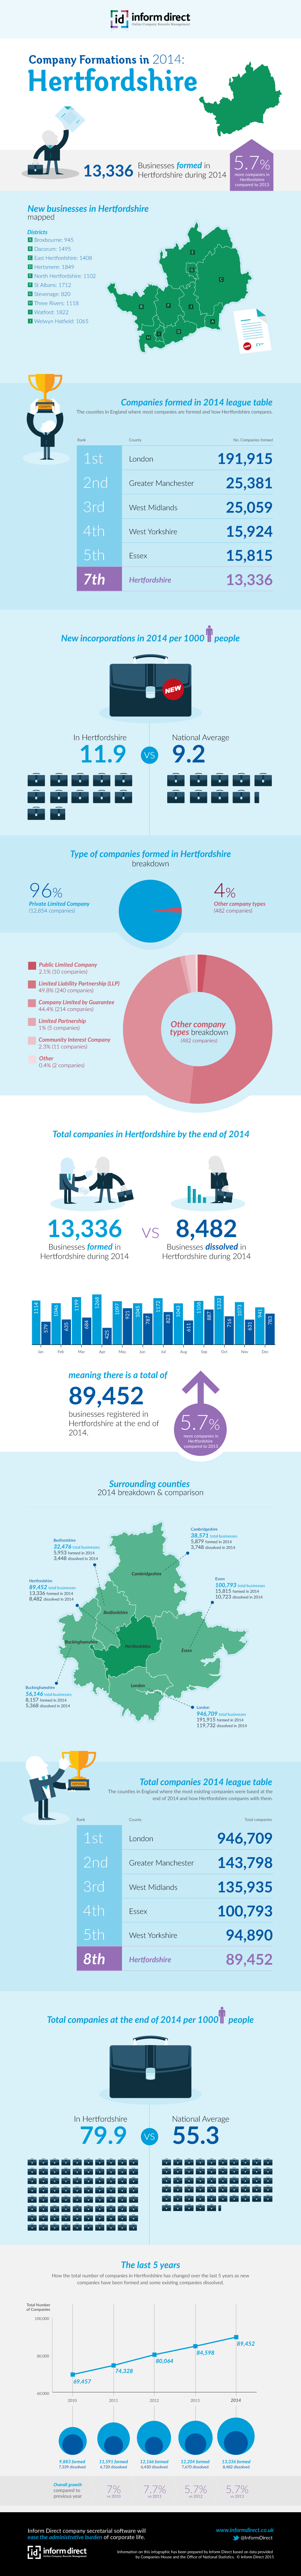 Inform Direct - Company Formations in Hertfordshire 2014 Infographic